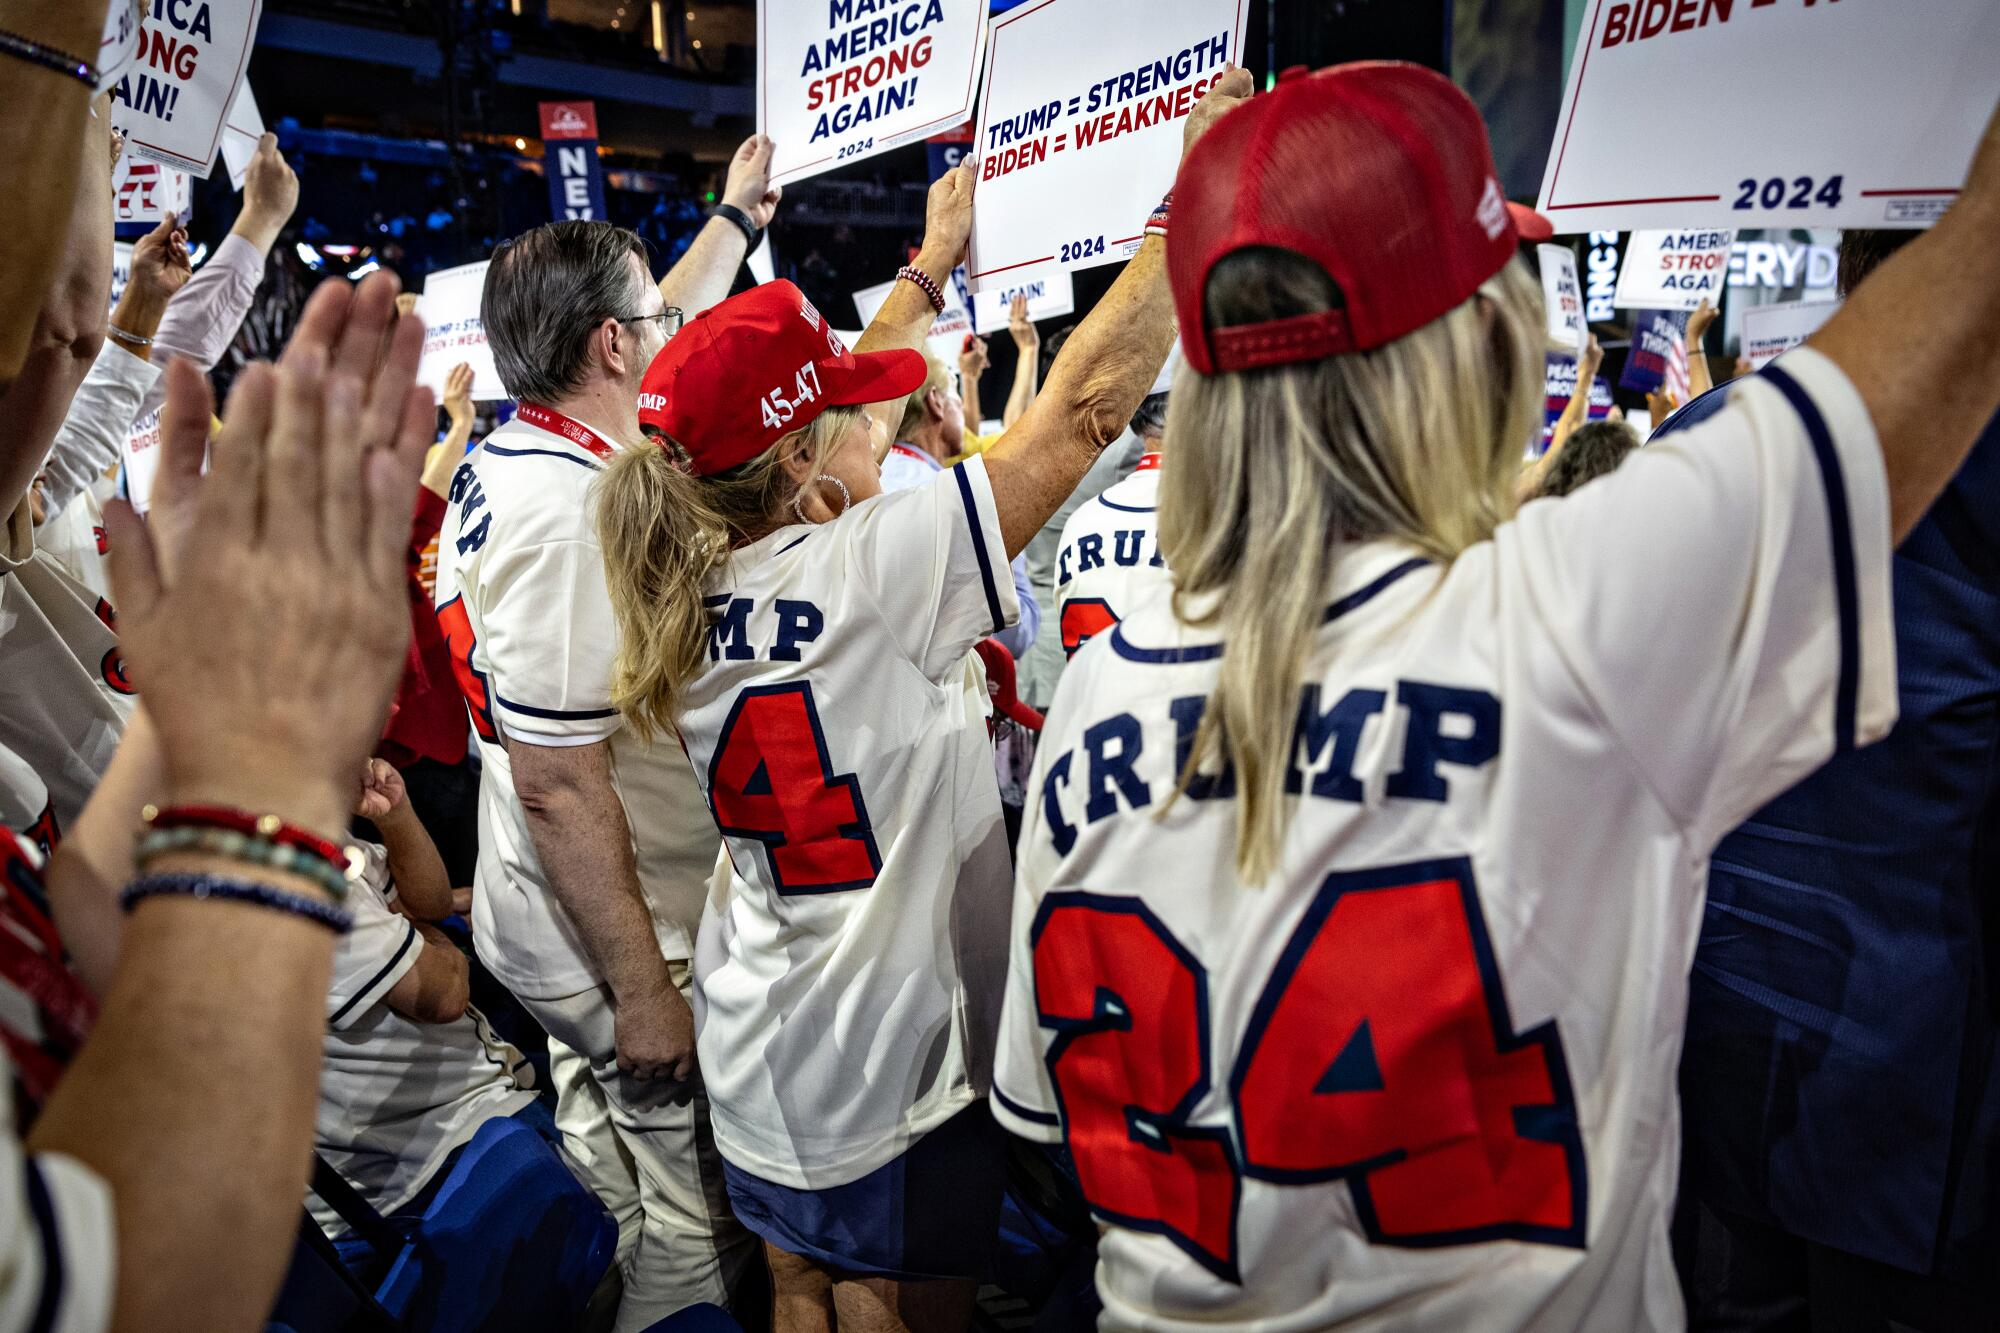 Texas delegates wear custom baseball jerseys with Trump 24 on the back at the